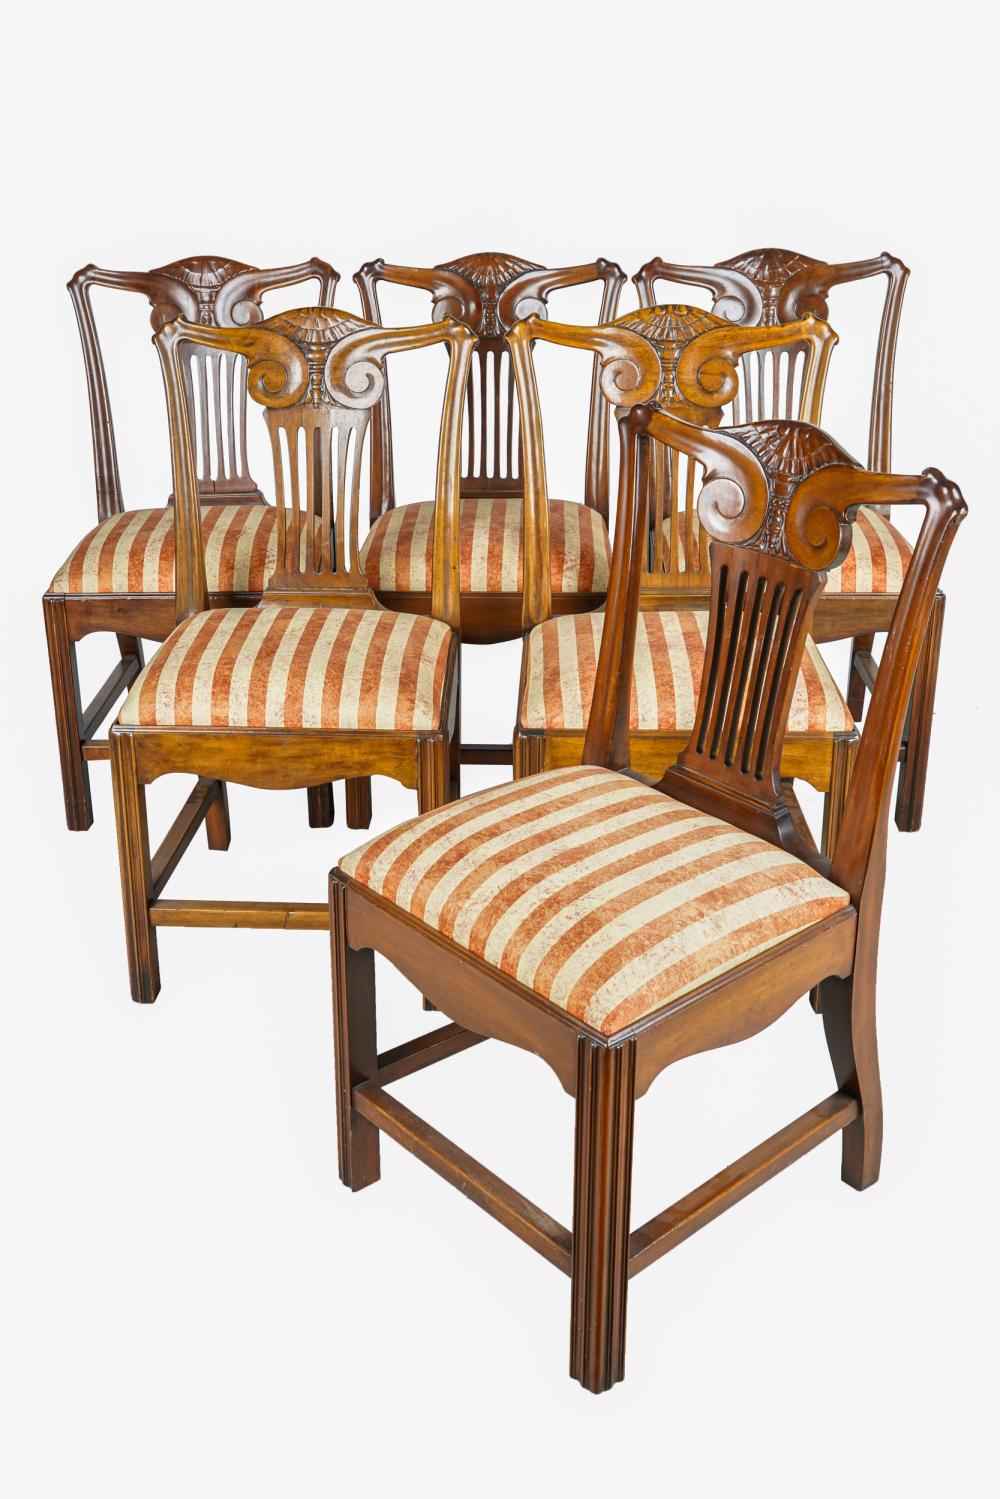 SIX CARVED MAHOGANY DINING CHAIRSeach